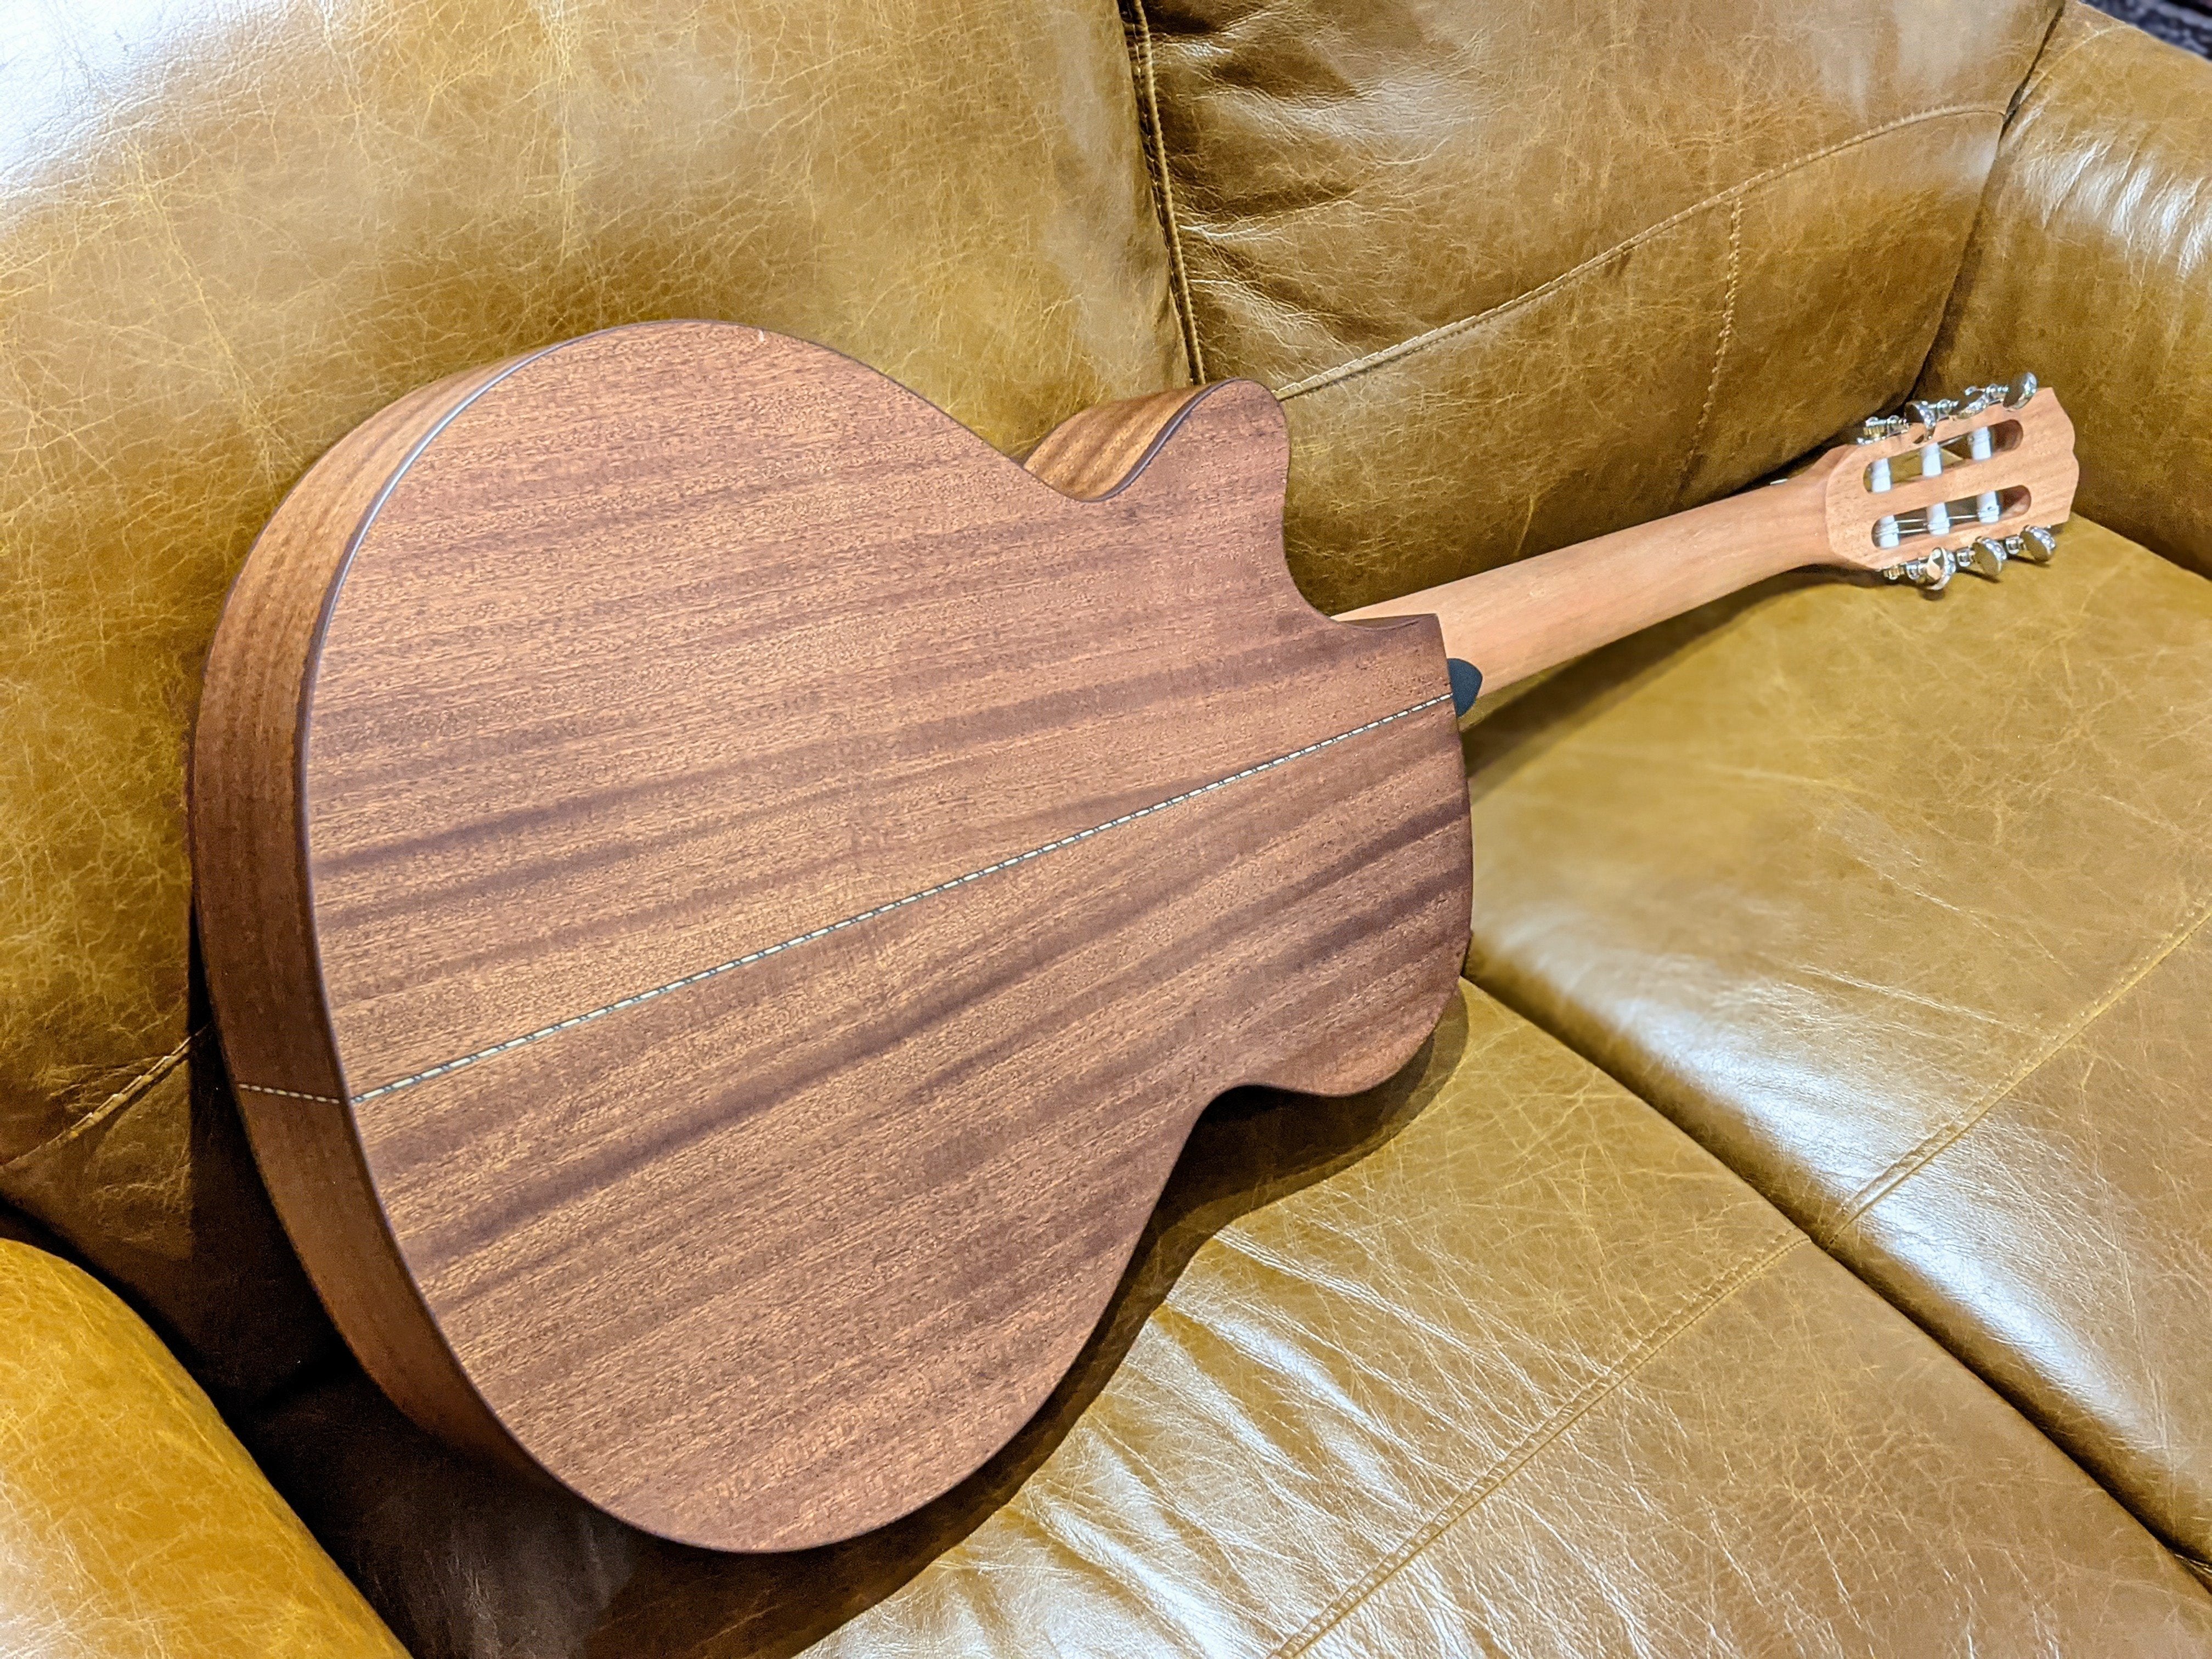 Dowina Rustica CLEC, Acoustic Guitar for sale at Richards Guitars.